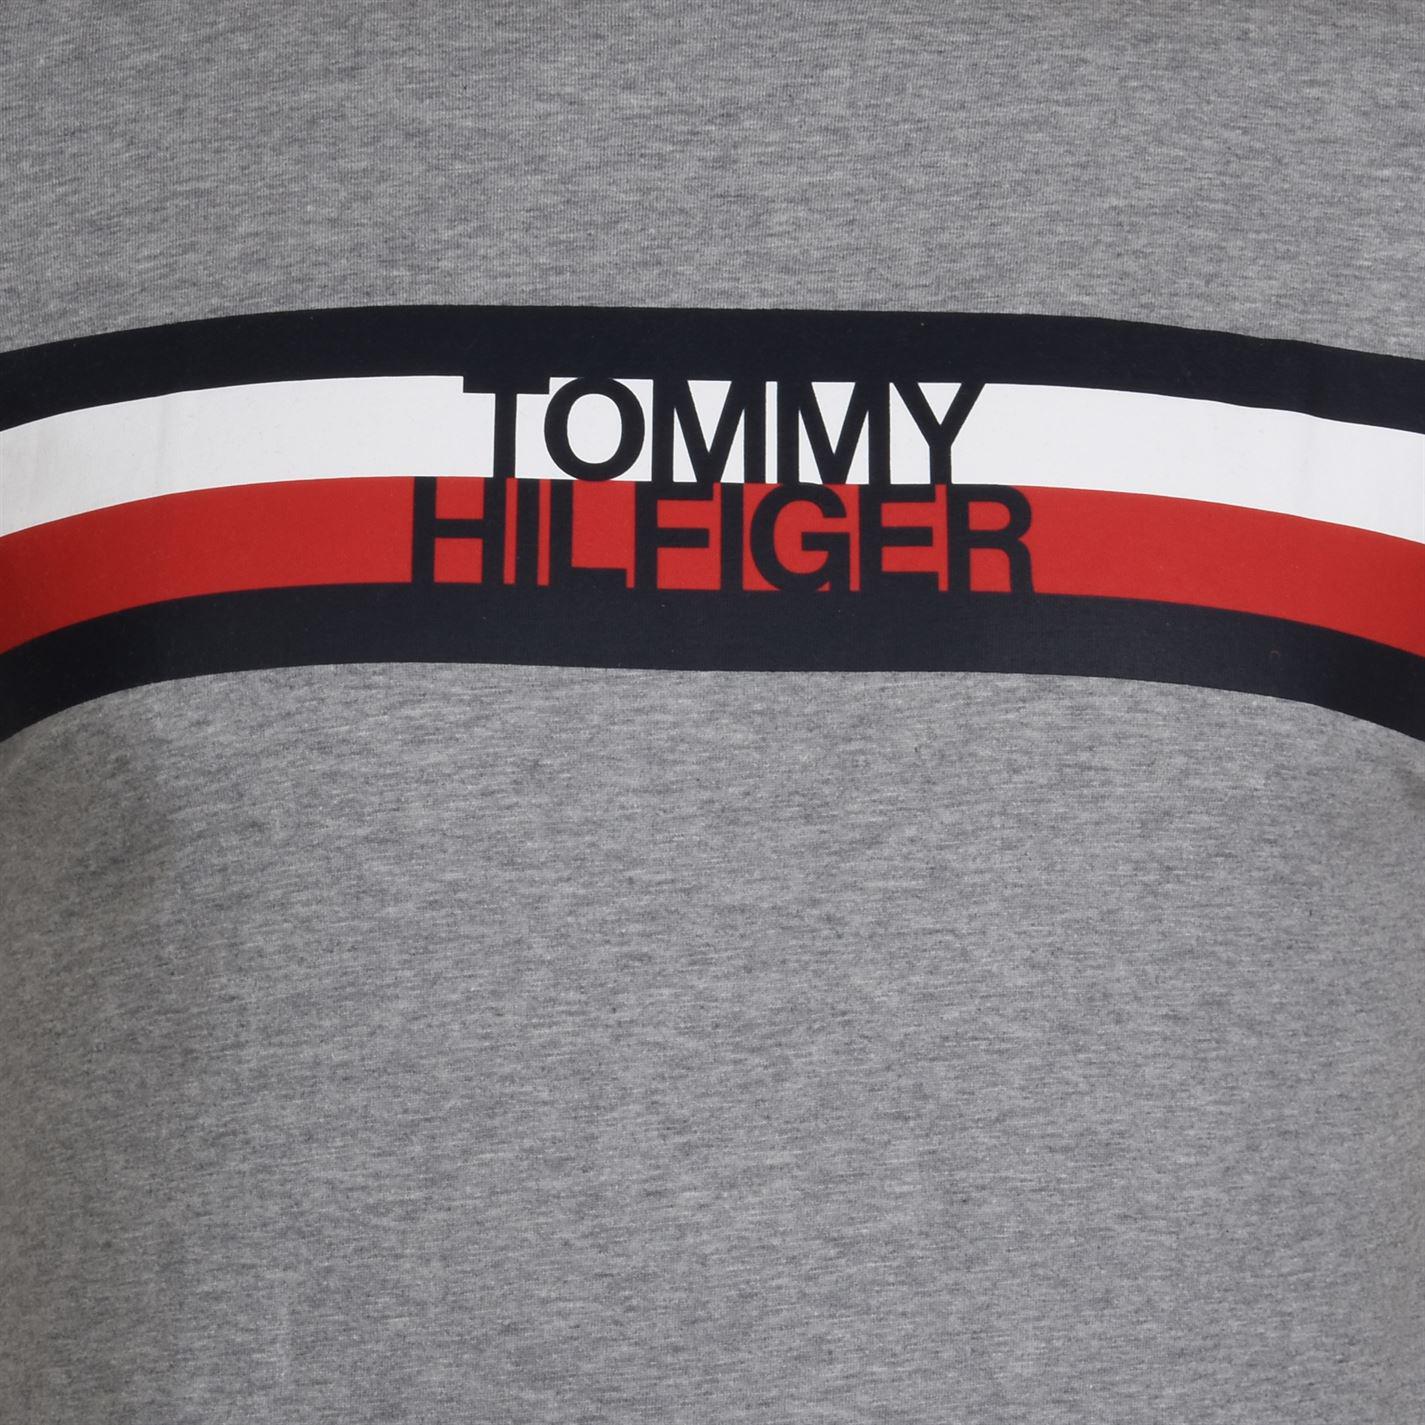 Tommy Hilfiger Signature Logo - Tommy Hilfiger Signature Logo T Shirt in Gray for Men - Lyst